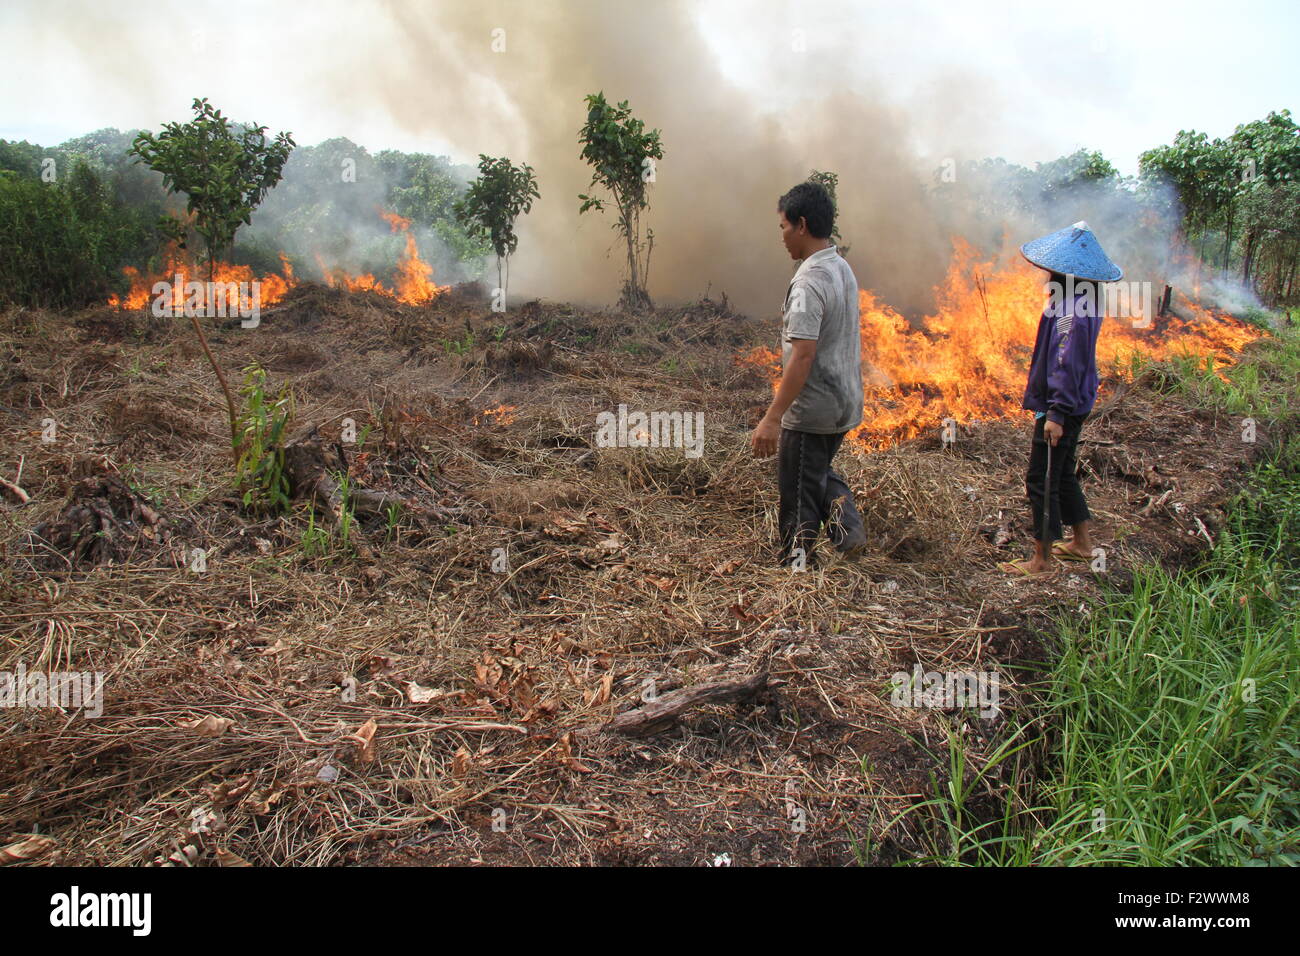 A resident light fires to clear land in Sambas district, West Kalimantan province. Stock Photo